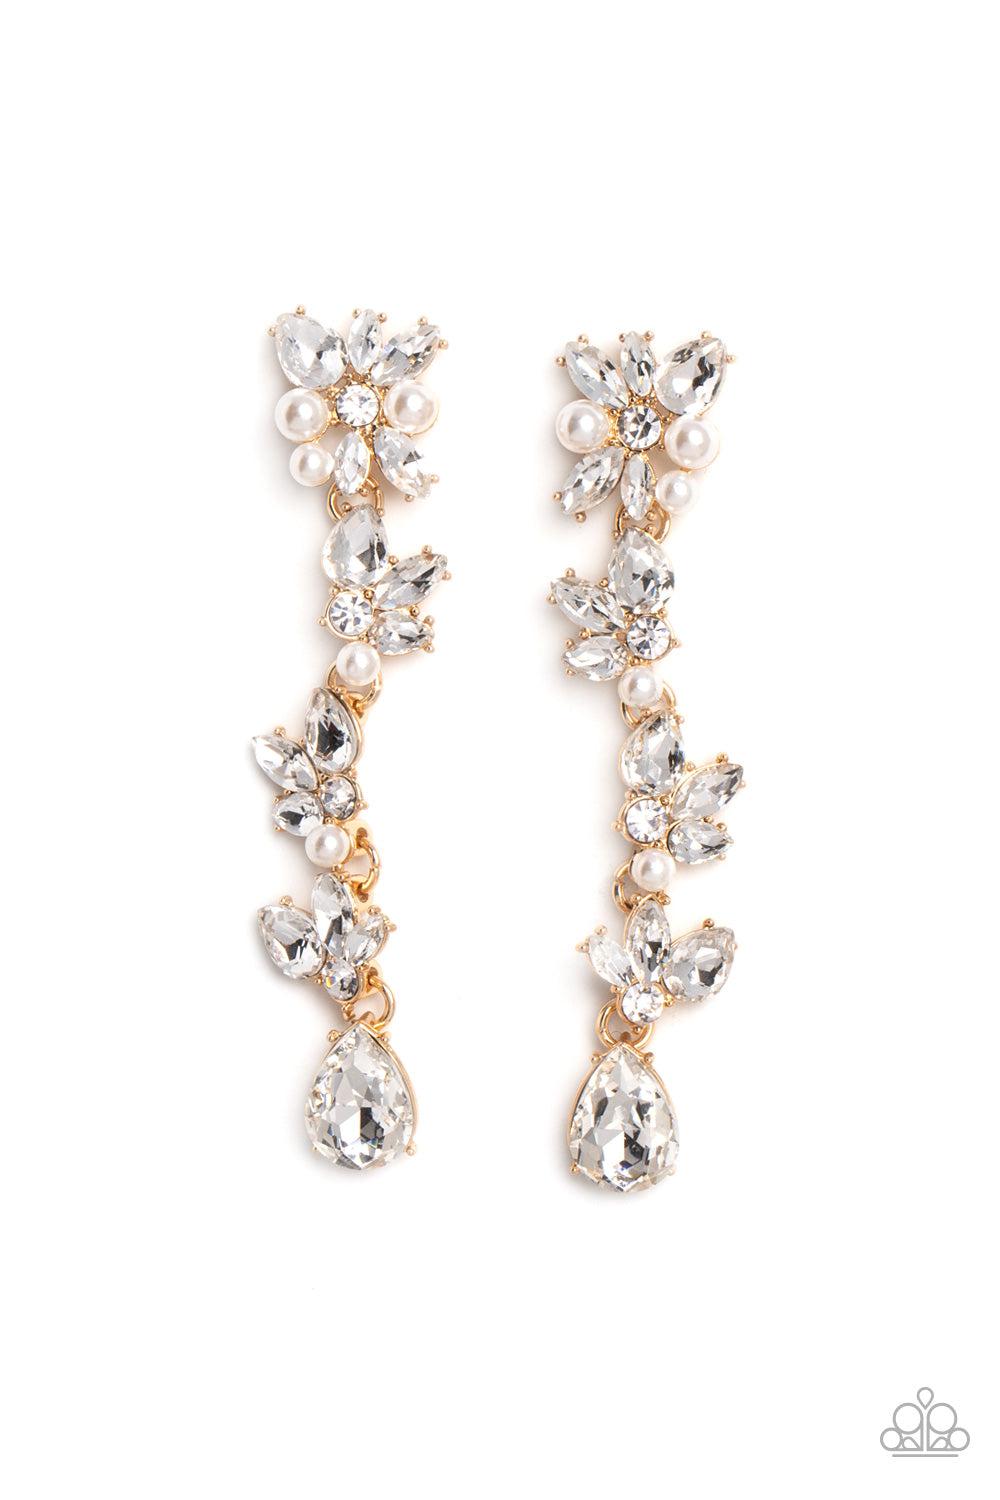 LIGHT at the Opera Gold and White Rhinestone &amp; Pearl Earrings - Paparazzi Accessories- lightbox - CarasShop.com - $5 Jewelry by Cara Jewels